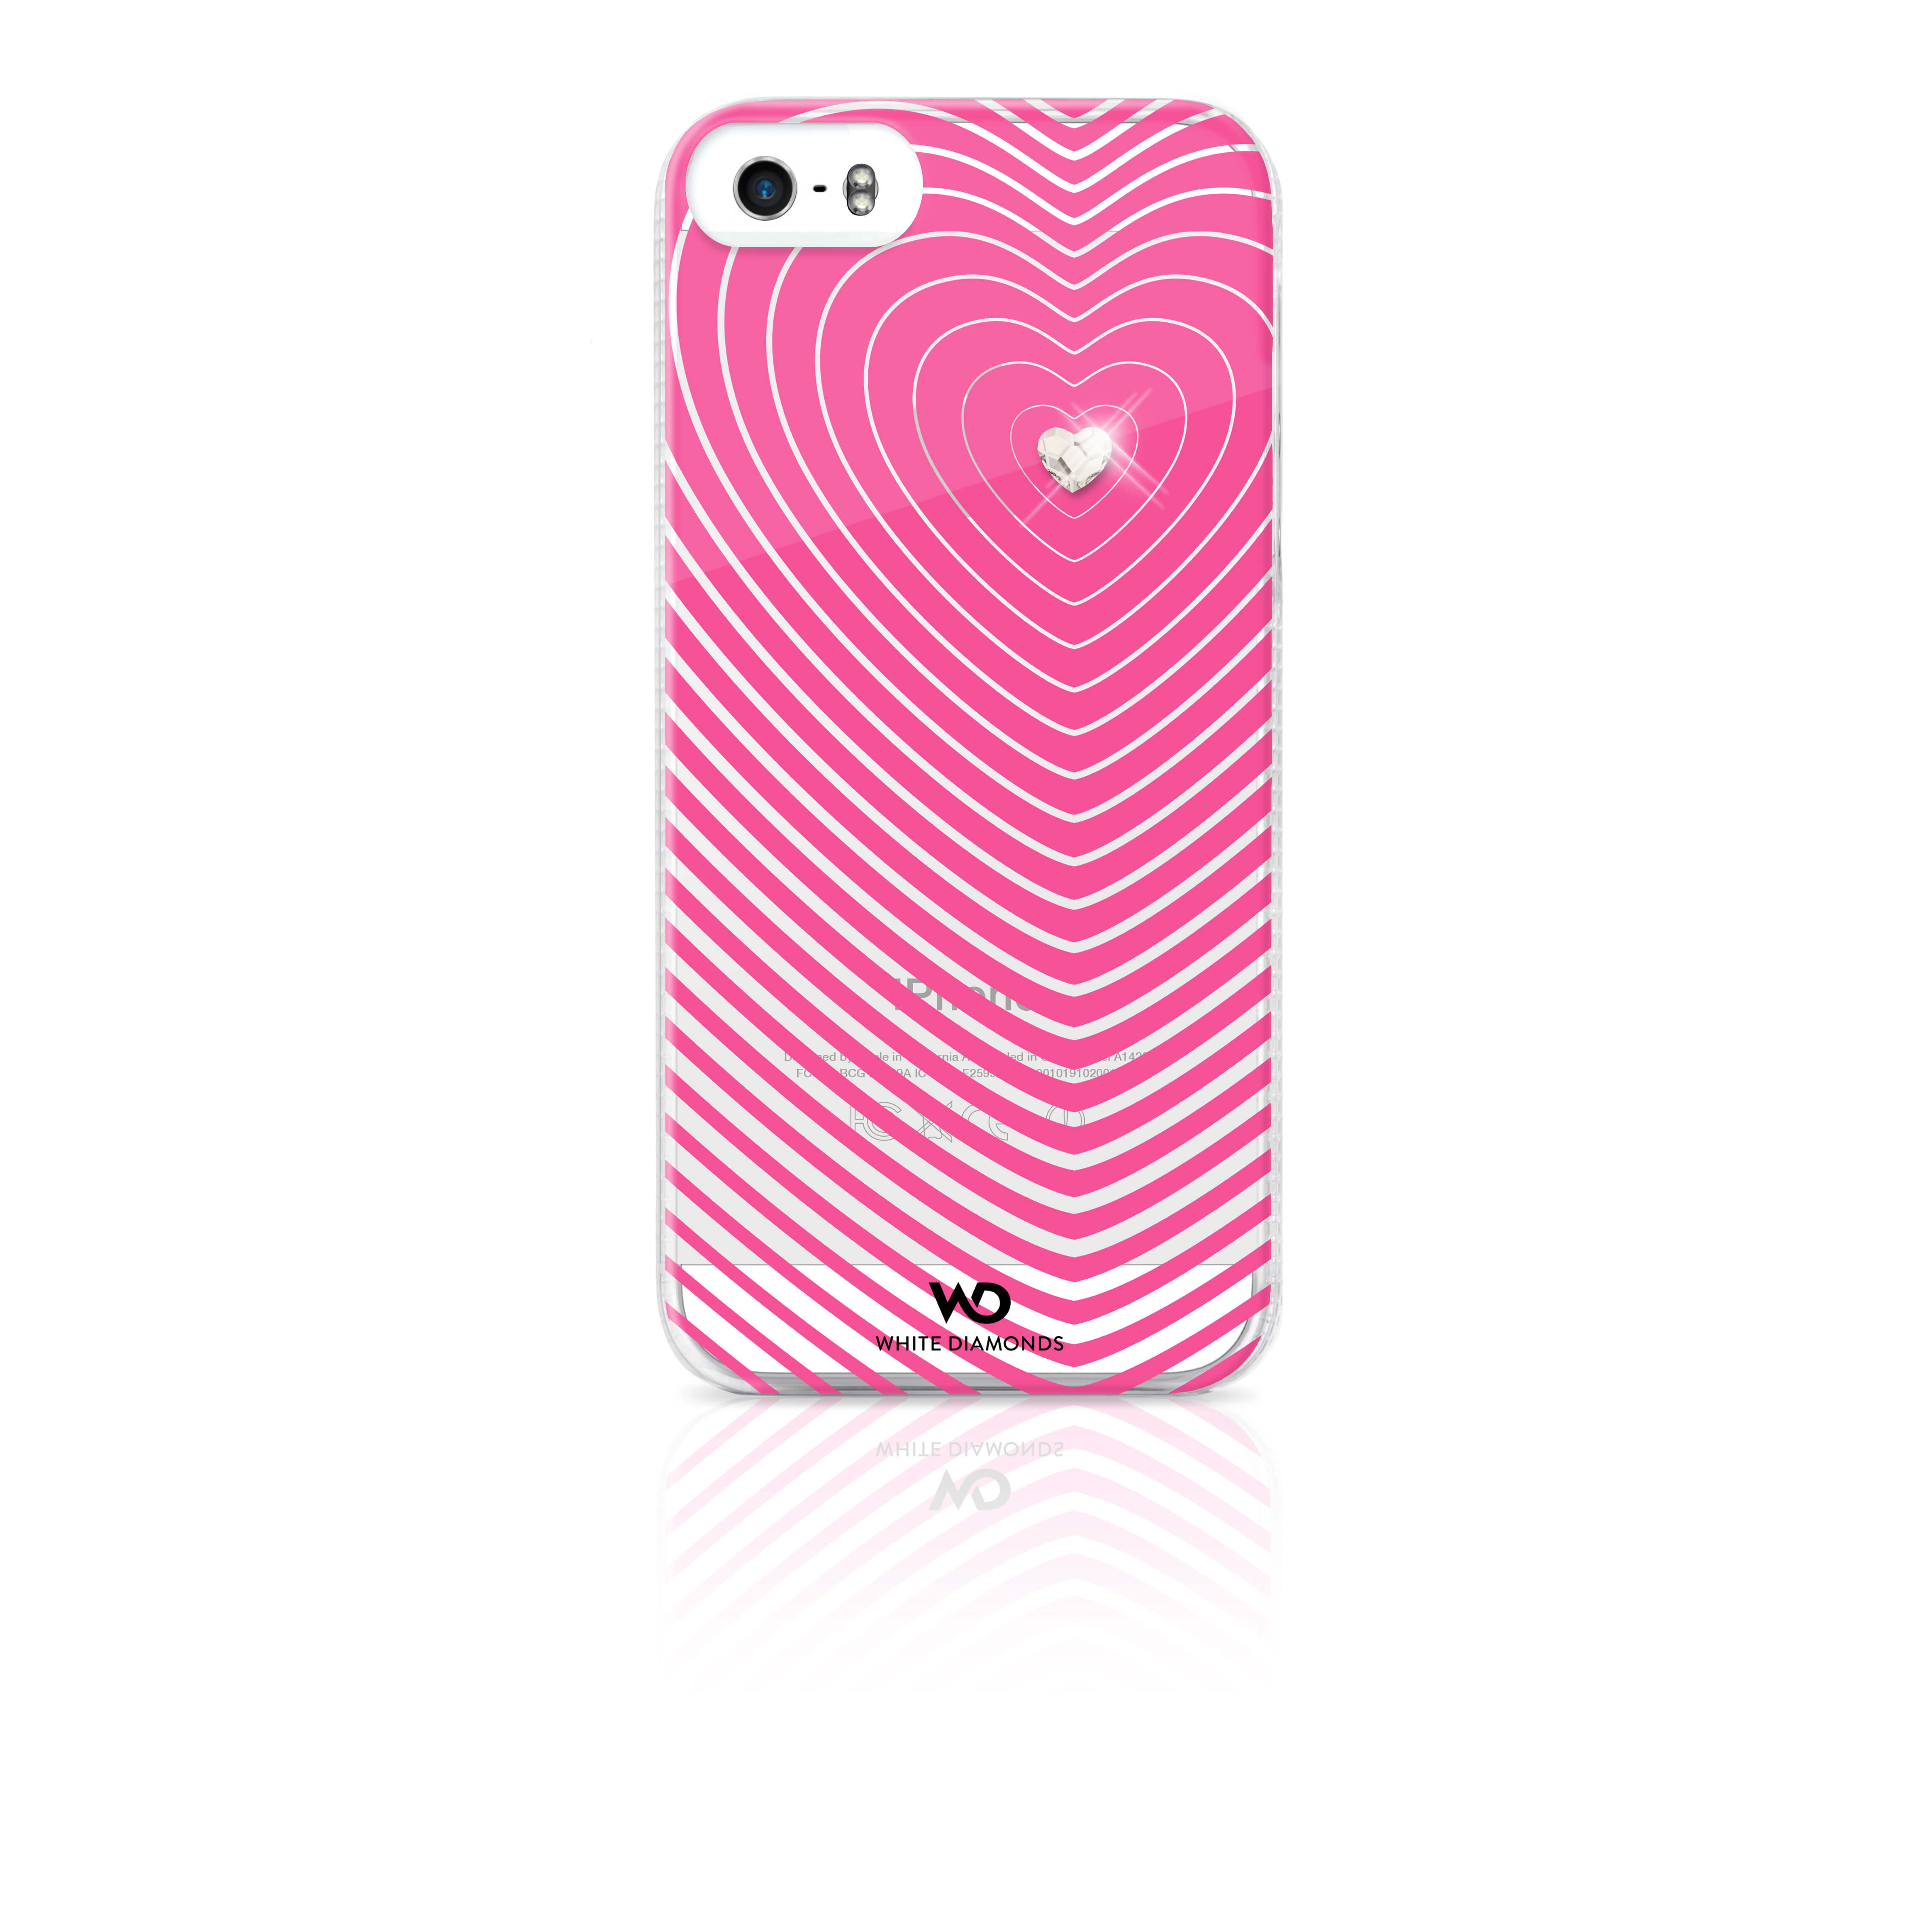 Heartbeat Mobile Phone Cover for Apple iPhone 5/5s, pink